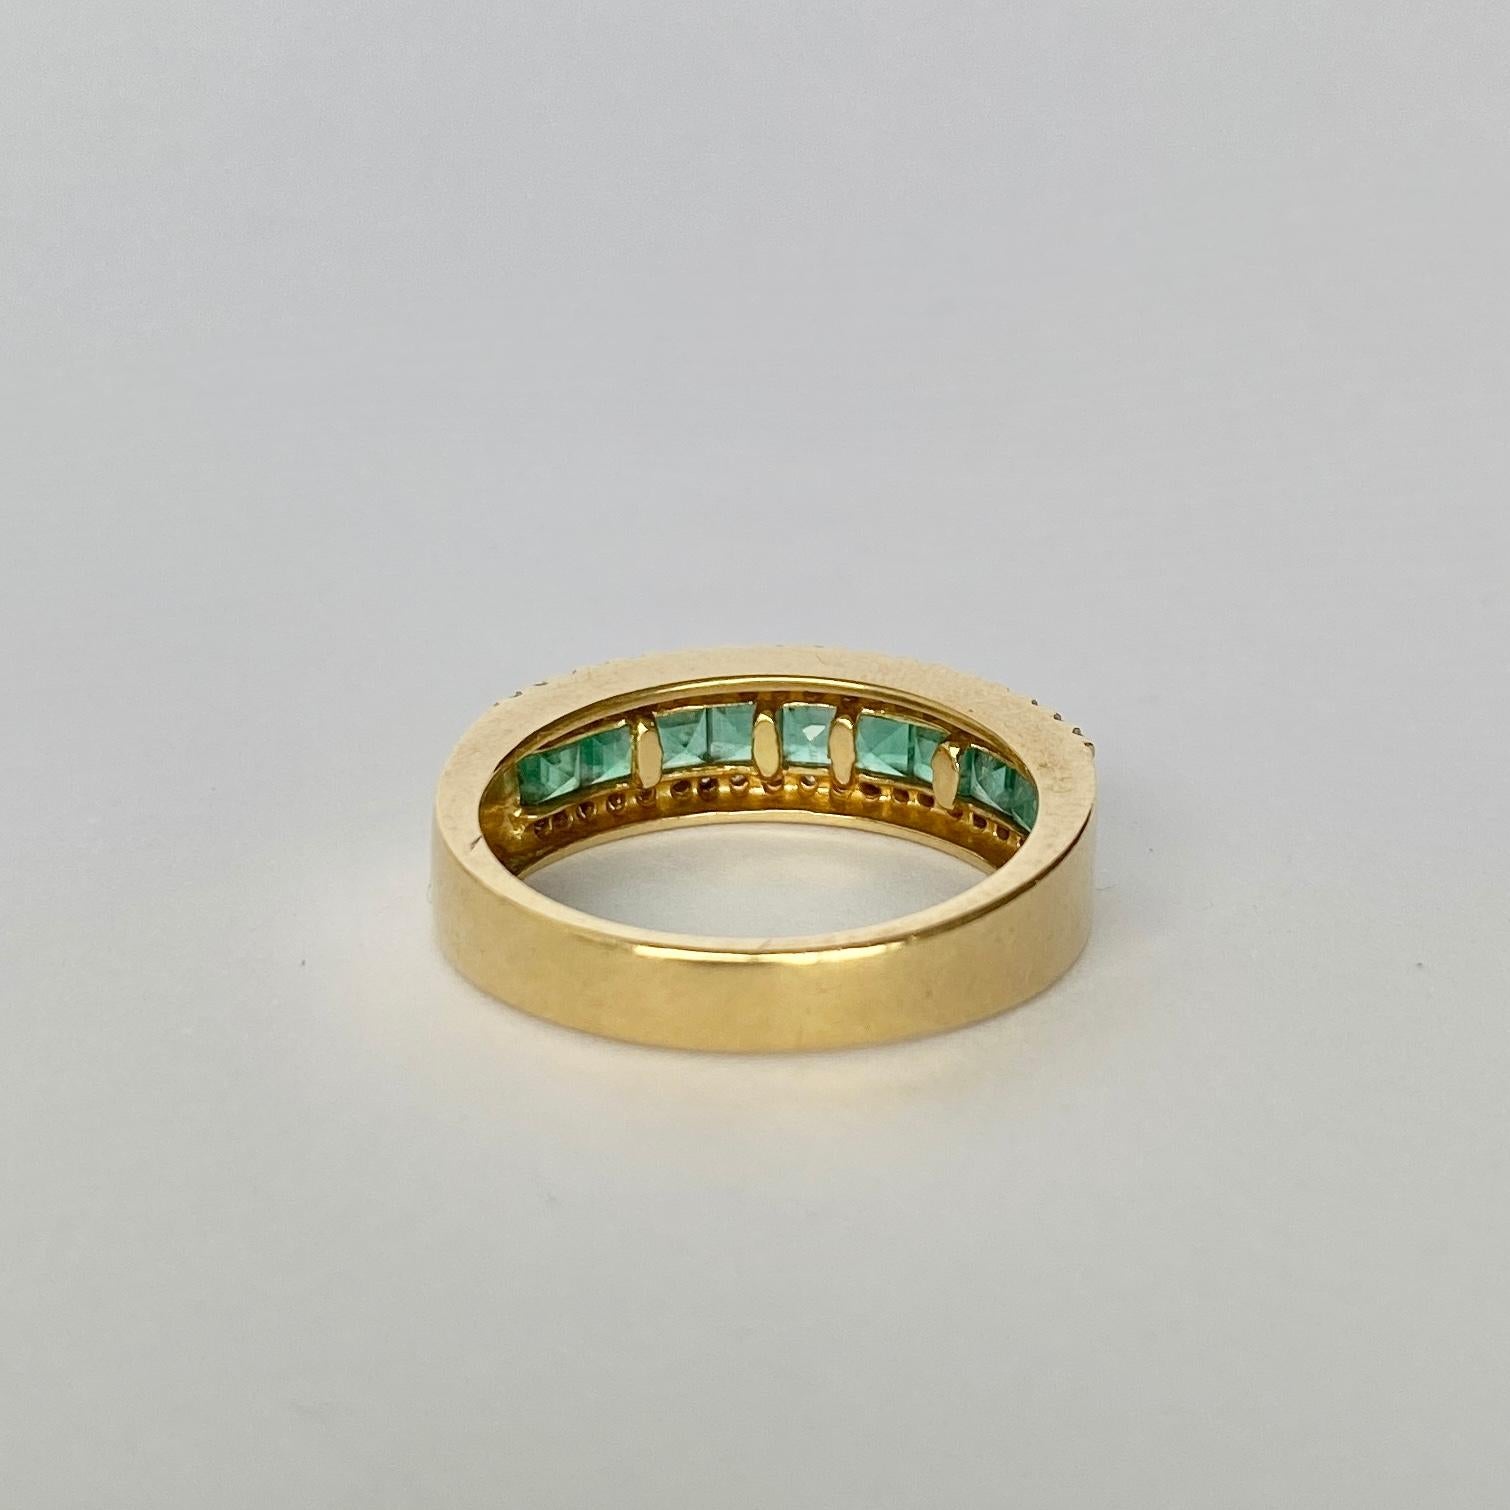 The square cut emeralds in this ring are beautiful and bright and measure 10pts each. Either side of the row of emeralds are two rows of diamonds. Each row total approx 20pts of diamonds. The ring is modelled in 18carat gold.

Ring Size: P or 7